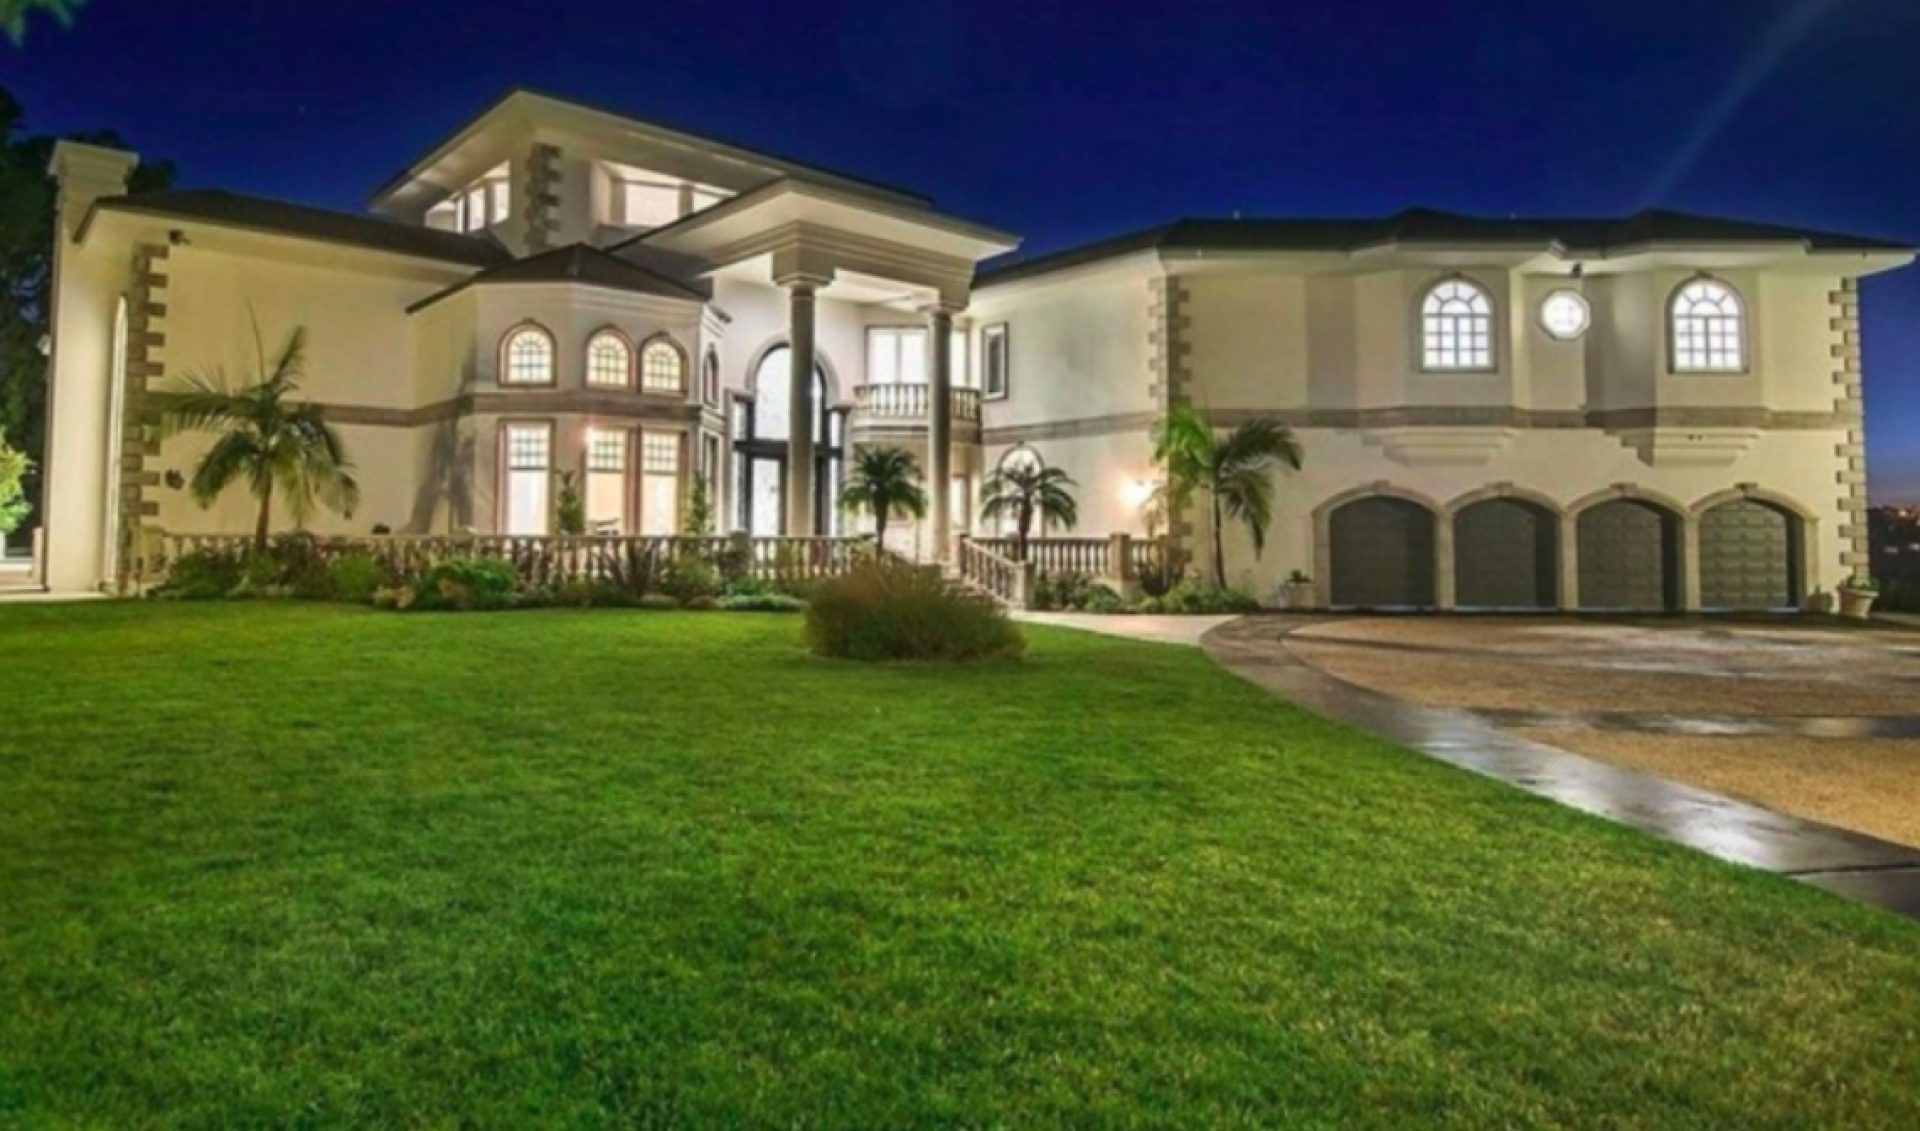 YouTube Star Jake Paul Will Move Into $6.9 Million Mansion